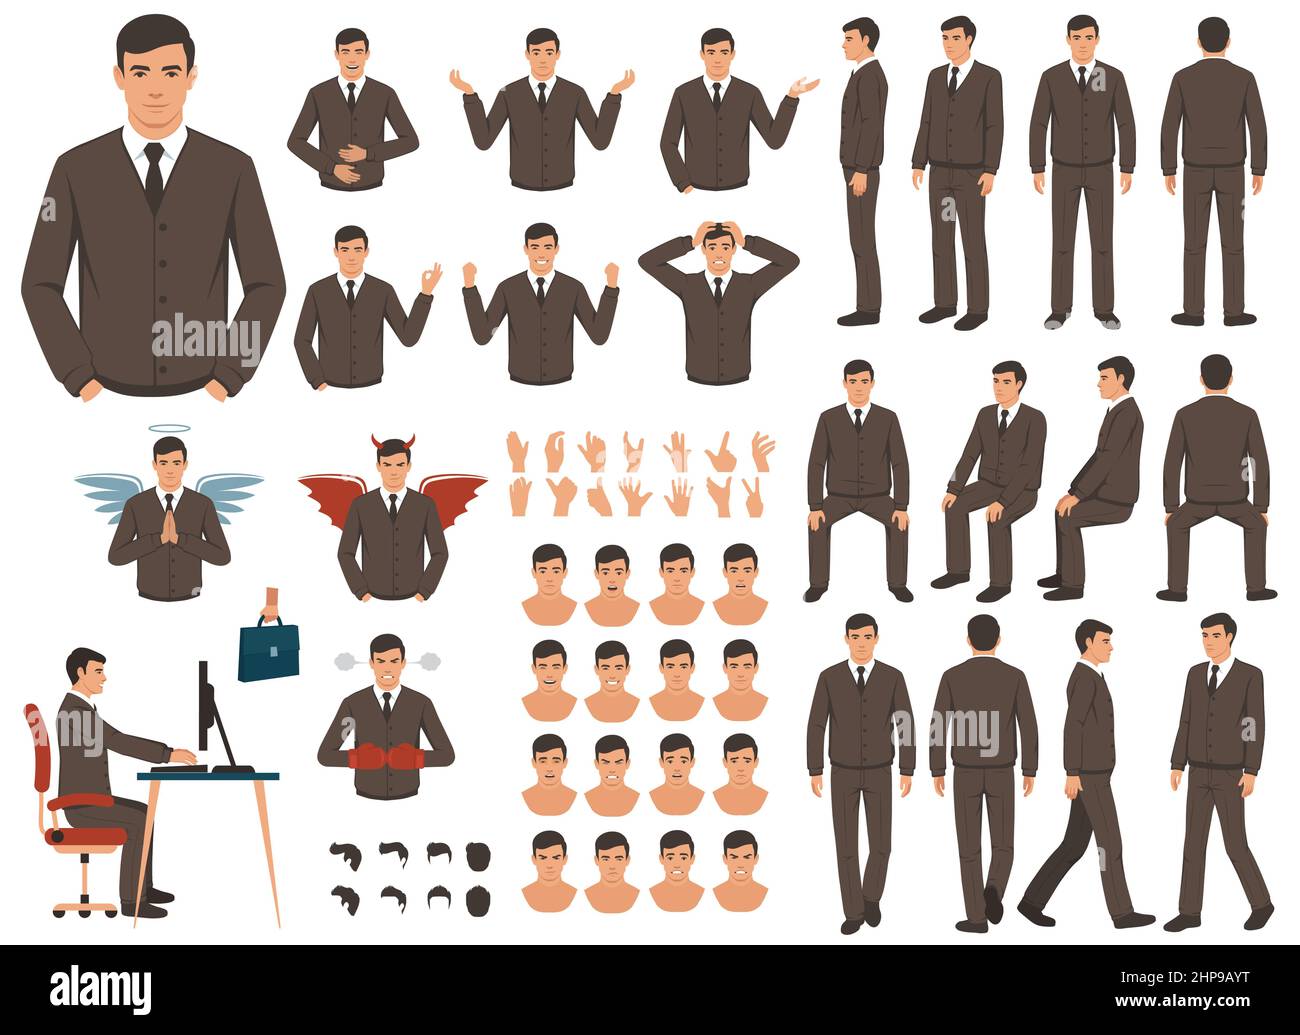 Sitting On Chair Side View: Over 3,304 Royalty-Free Licensable Stock  Illustrations & Drawings | Shutterstock